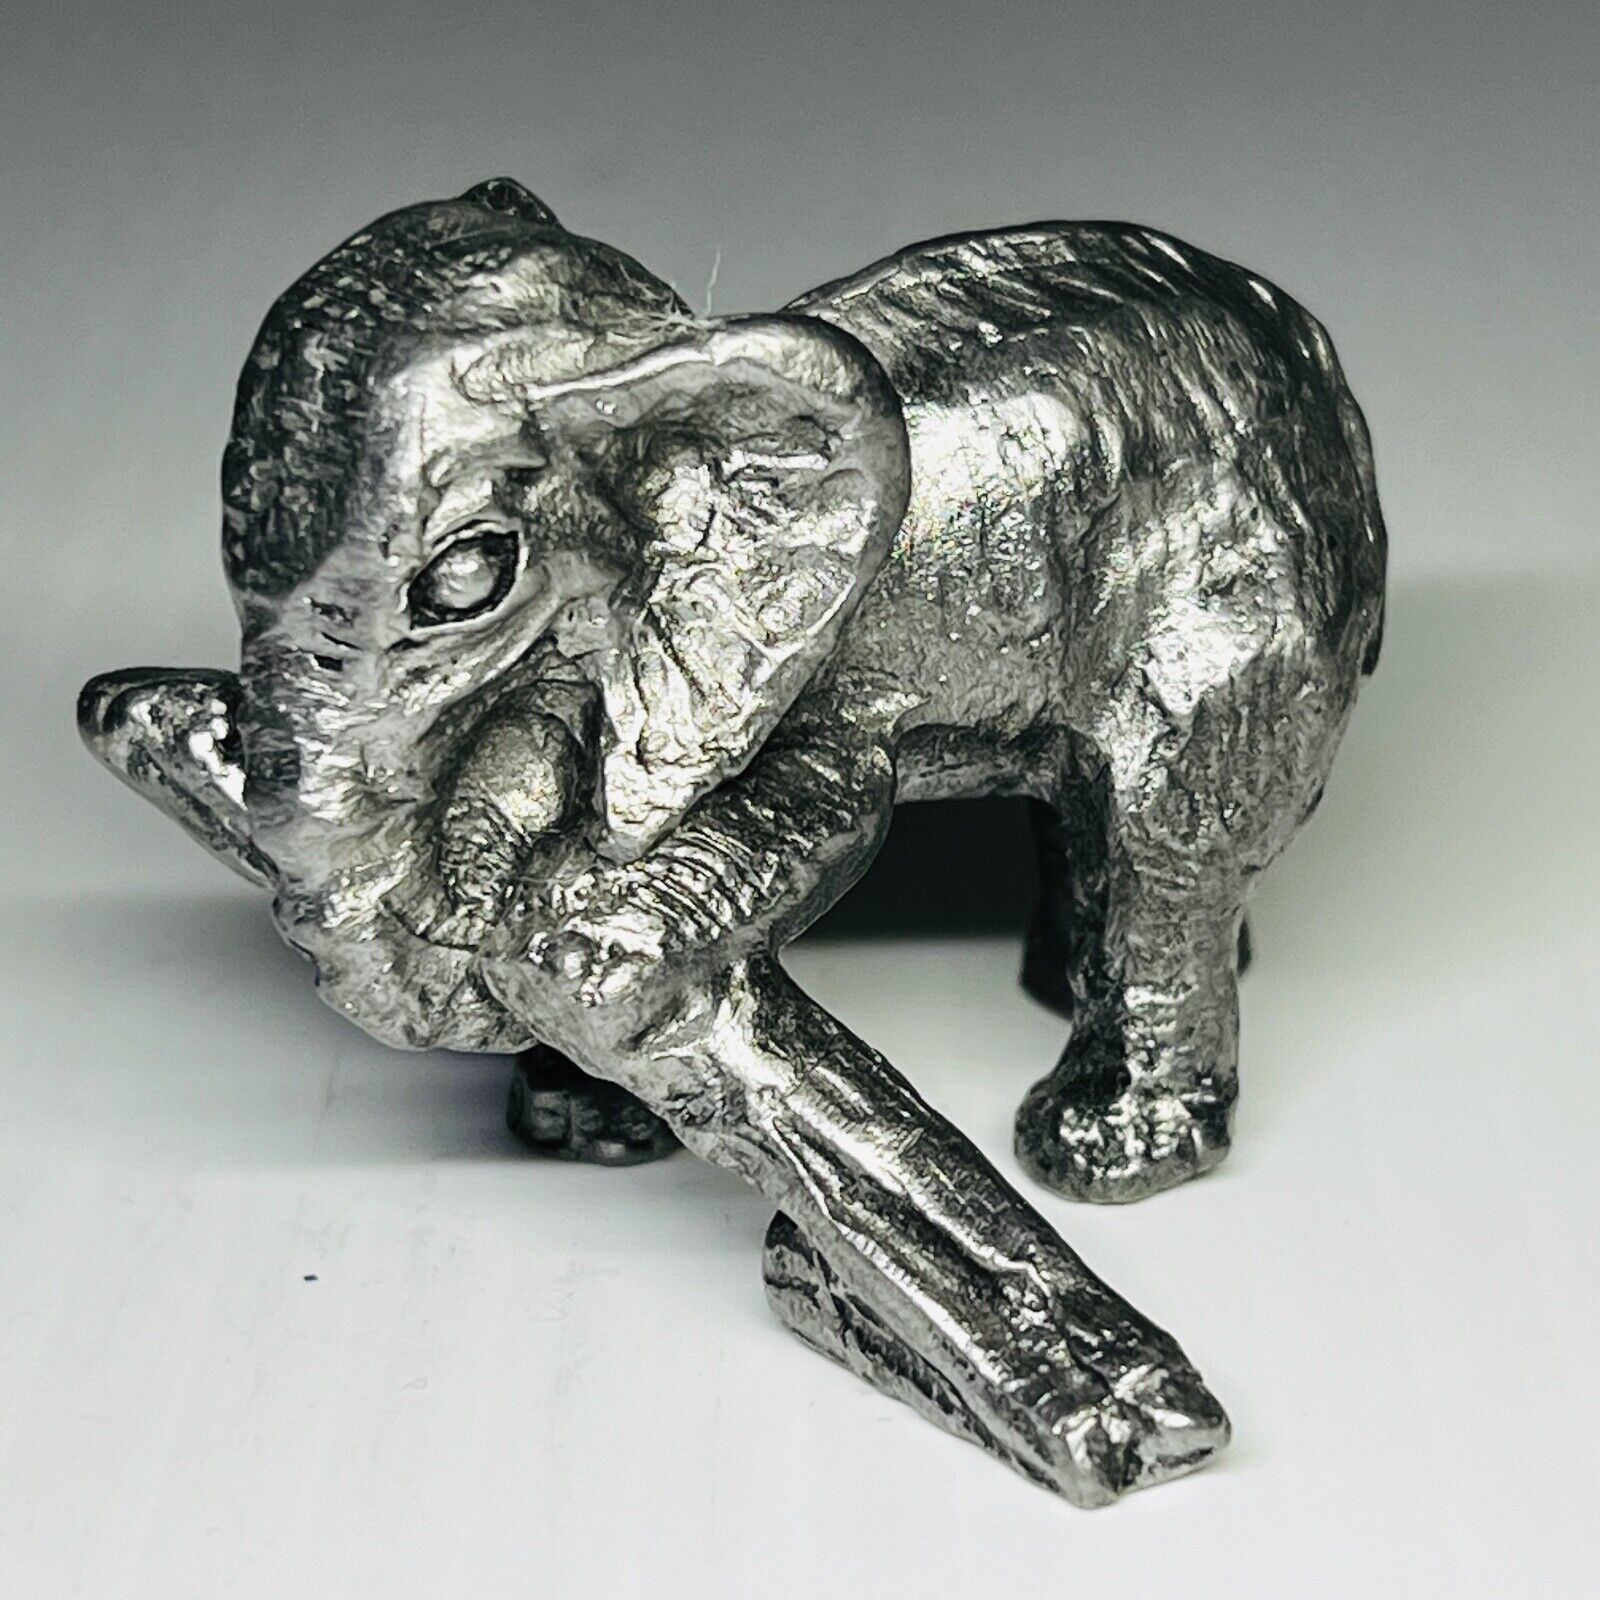 Primary image for Elephant Carrying Log Pewter Ricker Bartlett Figurine Sculpture RB On Foot